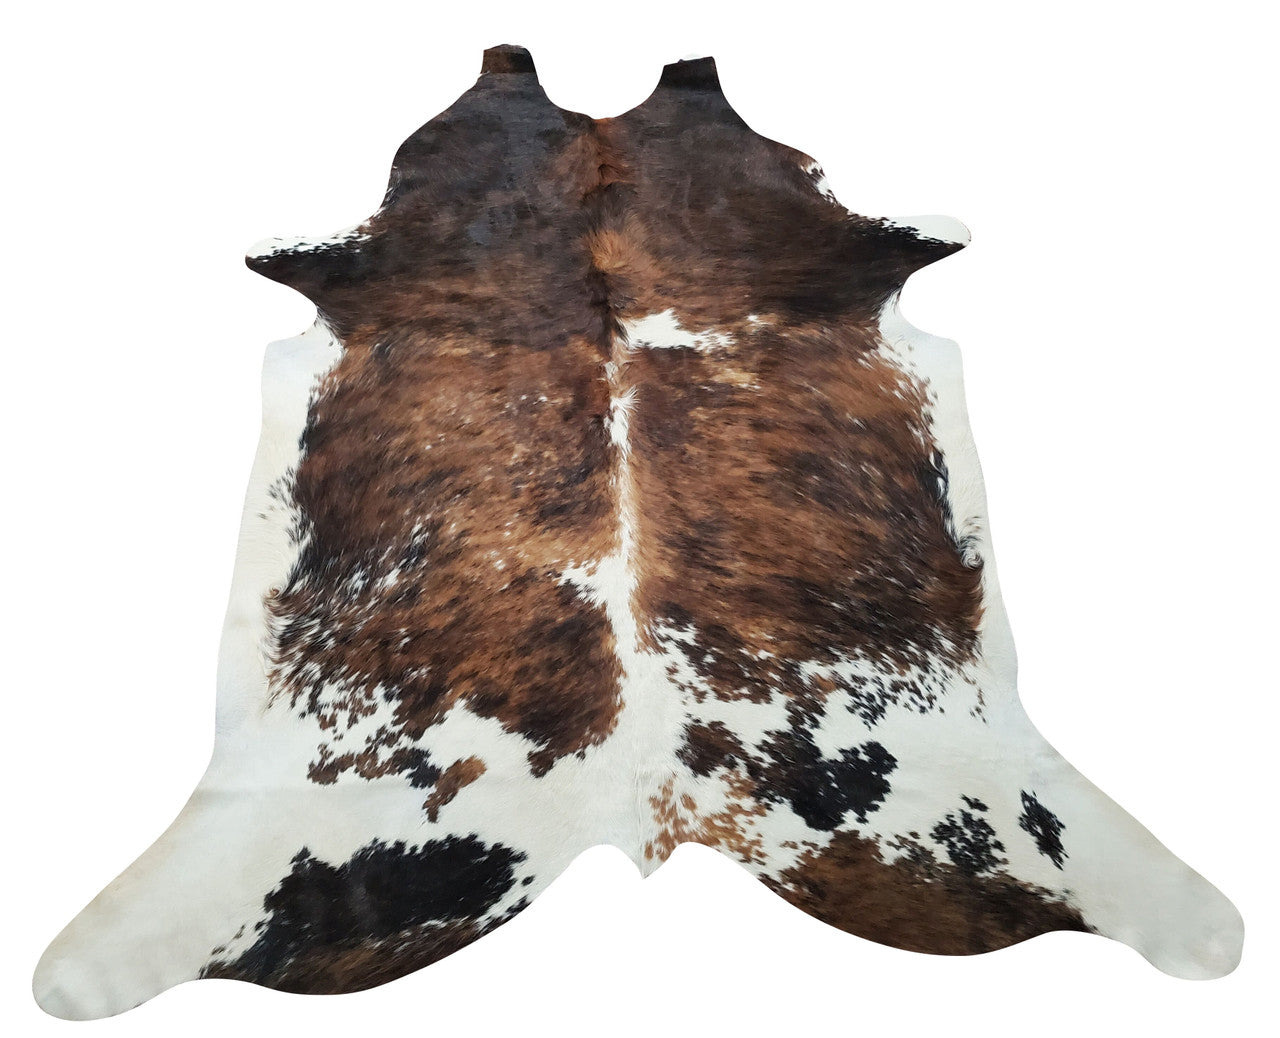 This cowhide rug is a stunning mix of lots of natural markings, dark brown to reddish with black on the edges. If you've been considering using a cowhide rug in your home this reddish brown is gorgeous, these look beautiful after many years of heavy foot traffic.